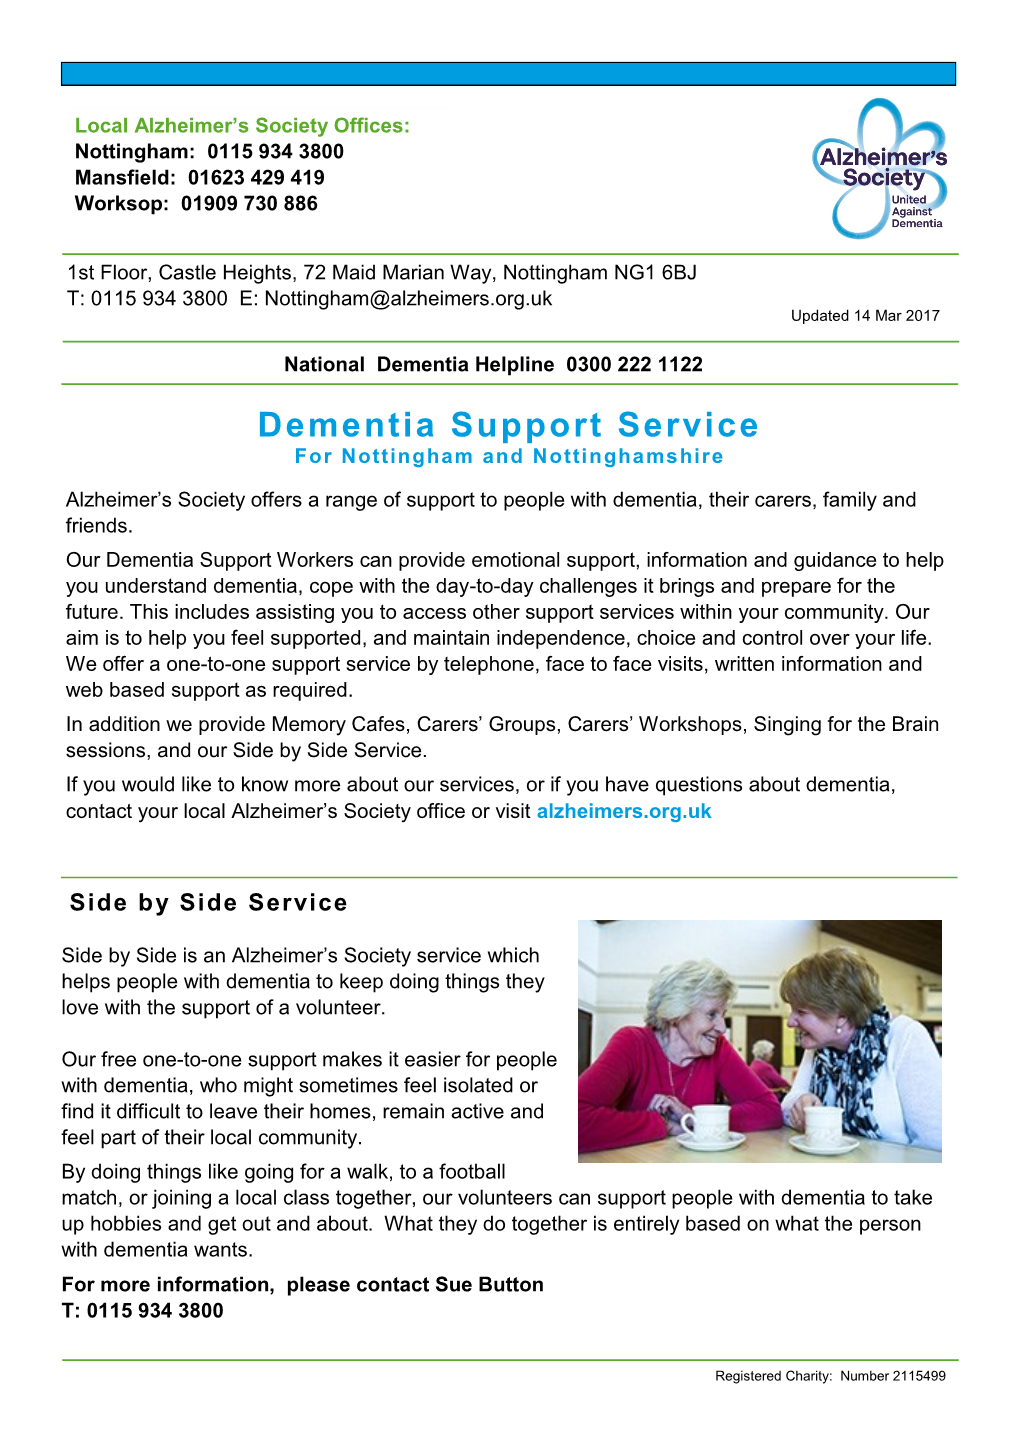 Dementia Support Service for Nottingham and Nottinghamshire